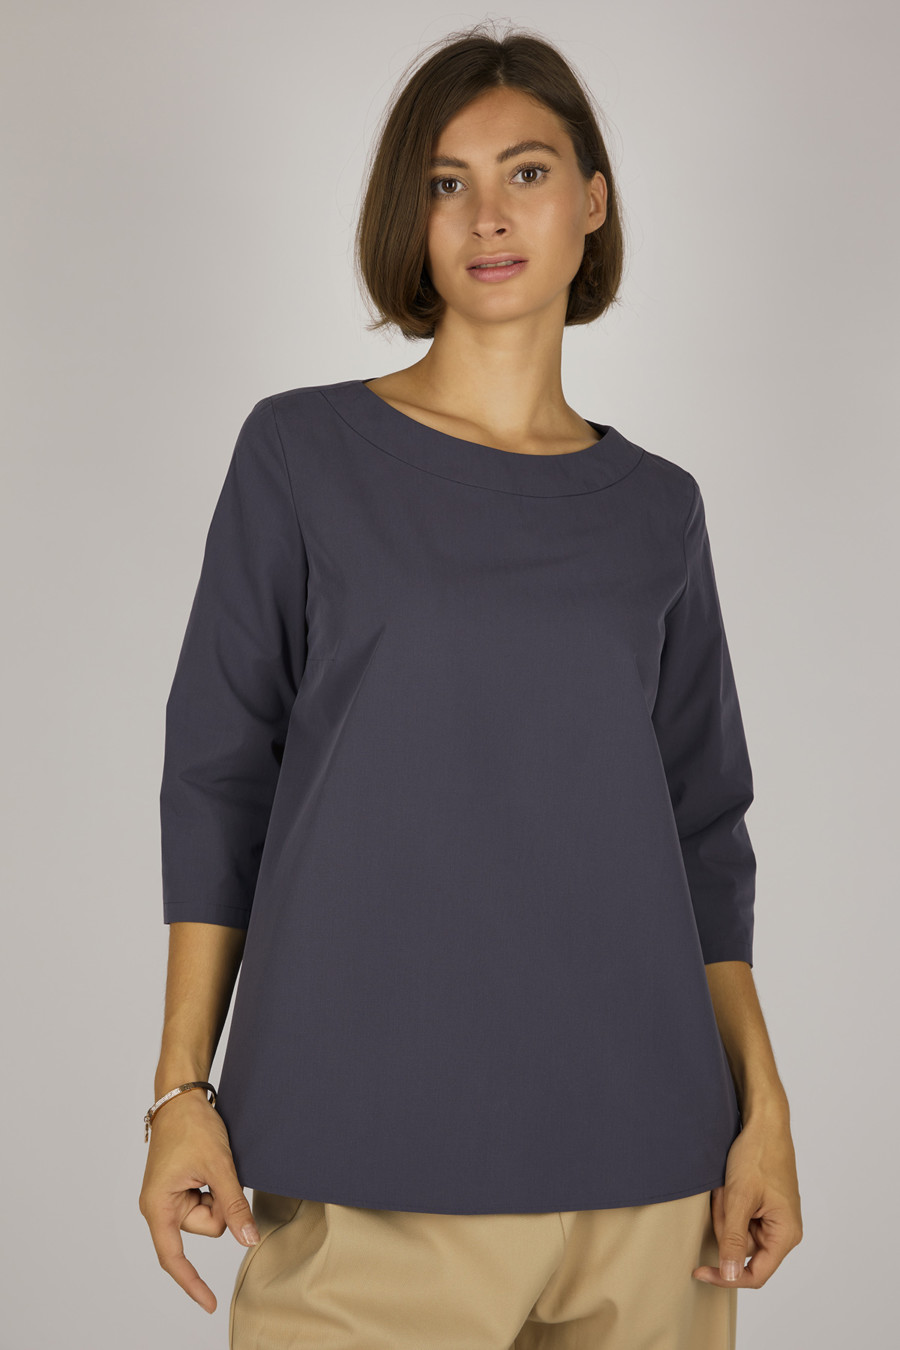 ALISON – Wide shirt in organic cotton – Color: Slate